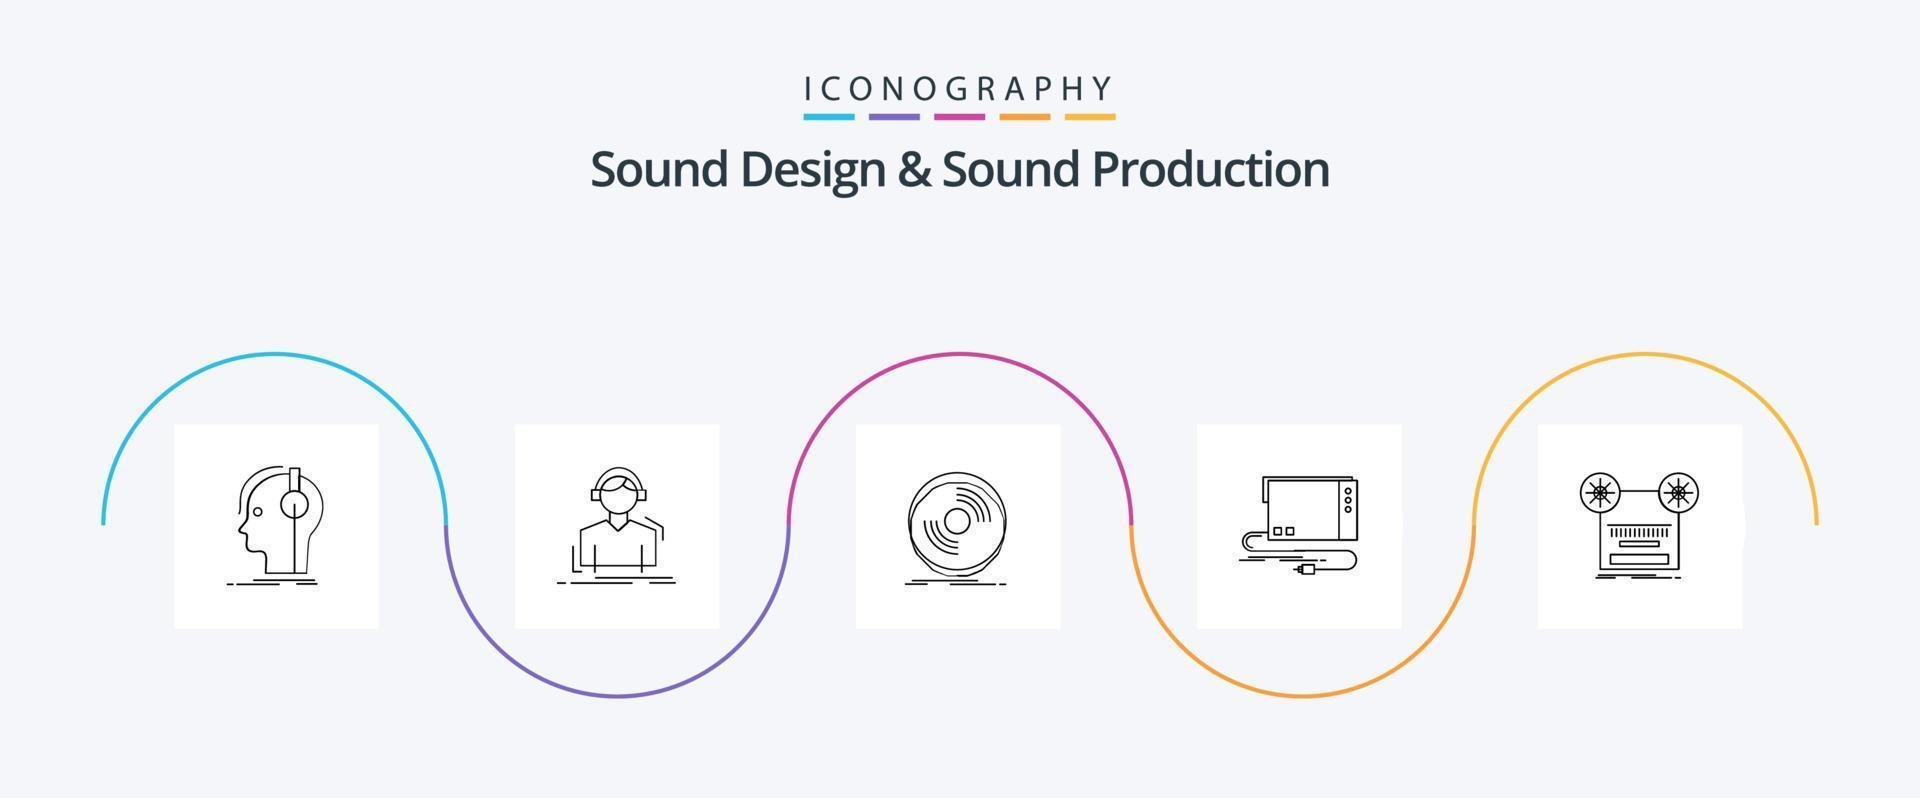 Sound Design And Sound Production Line 5 Icon Pack Including external. audio. meloman. vinyl. phonograph vector